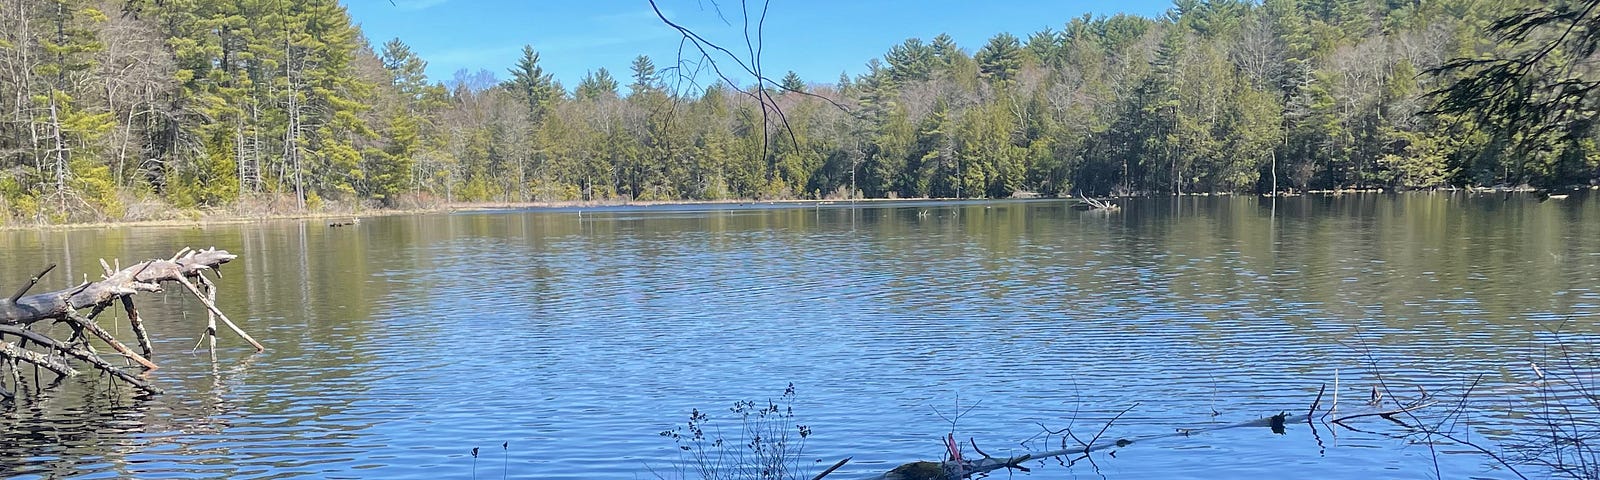 Scene of lake surrounded by pine trees in the Catskills on a sunny day